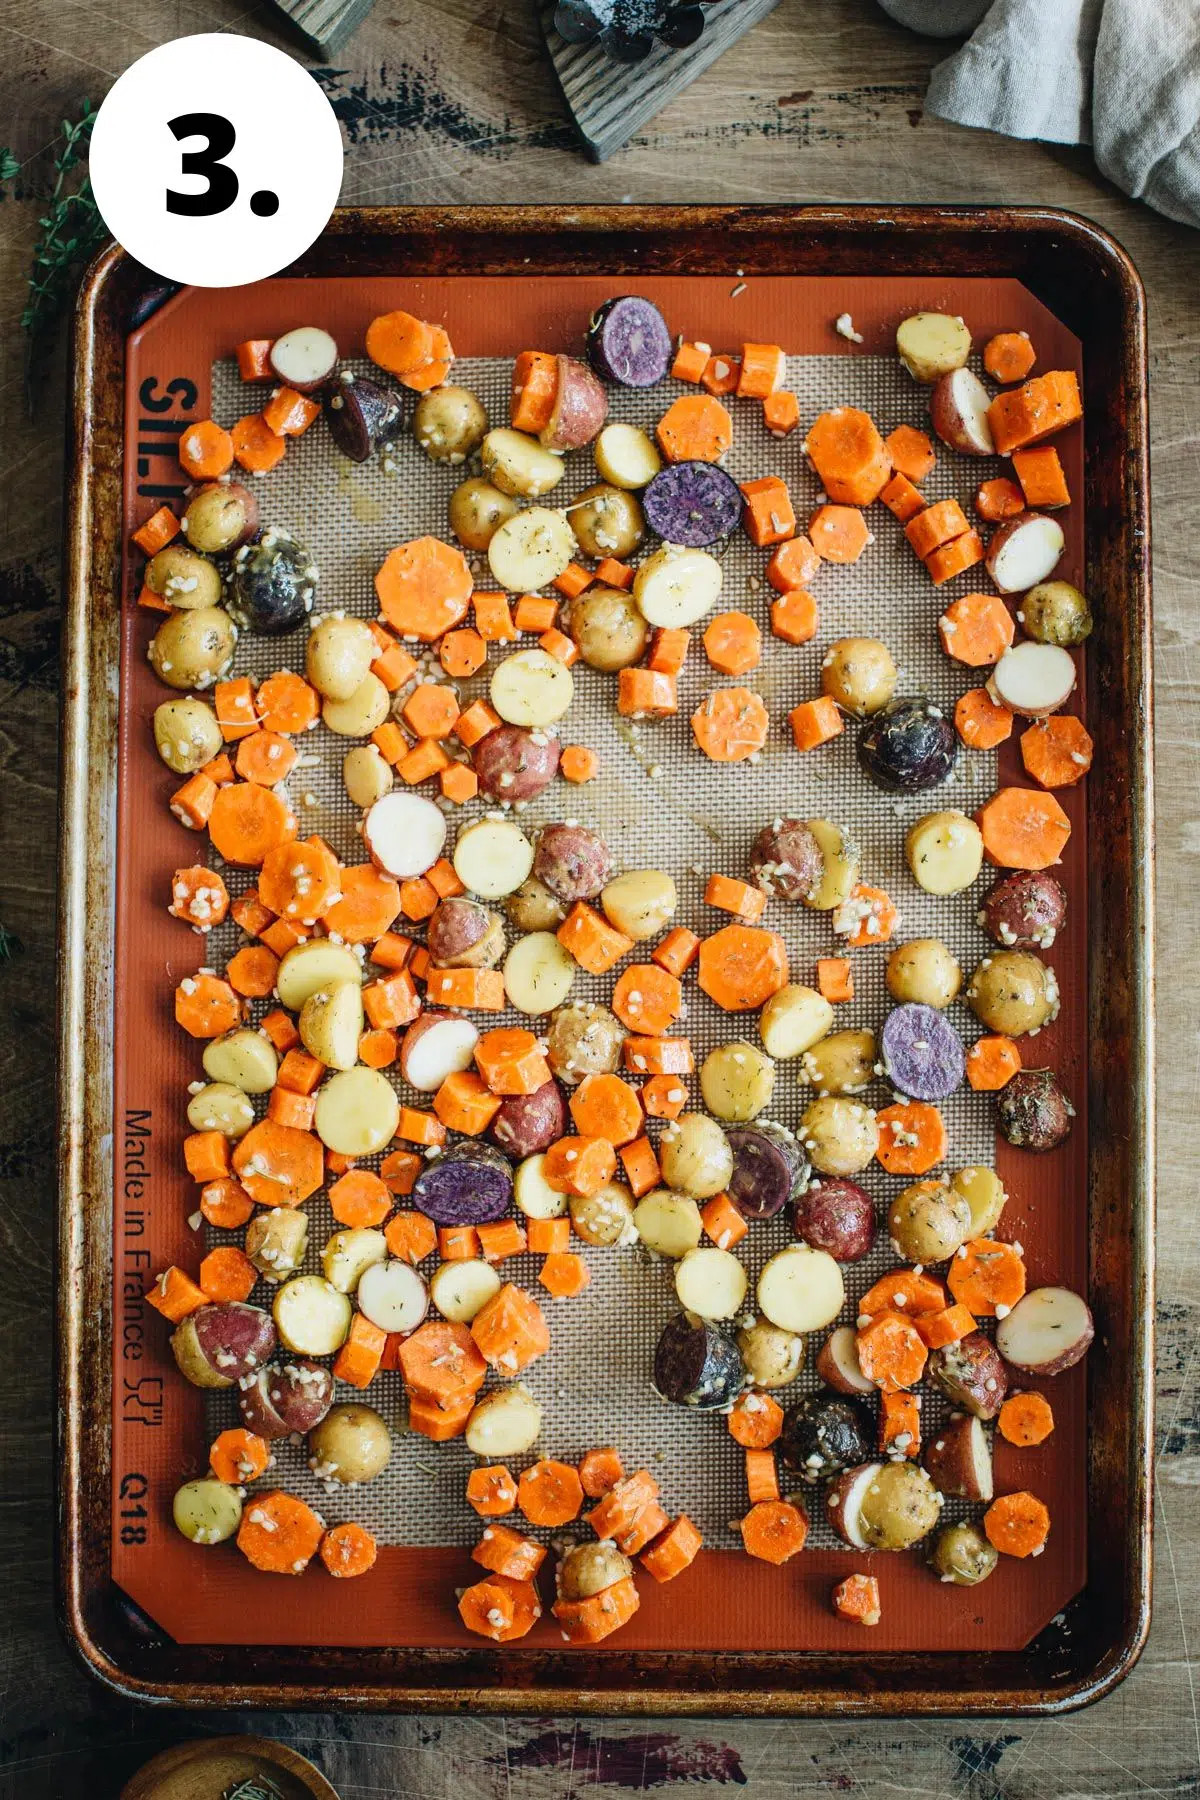 Roasted carrots and potatoes process step 3.